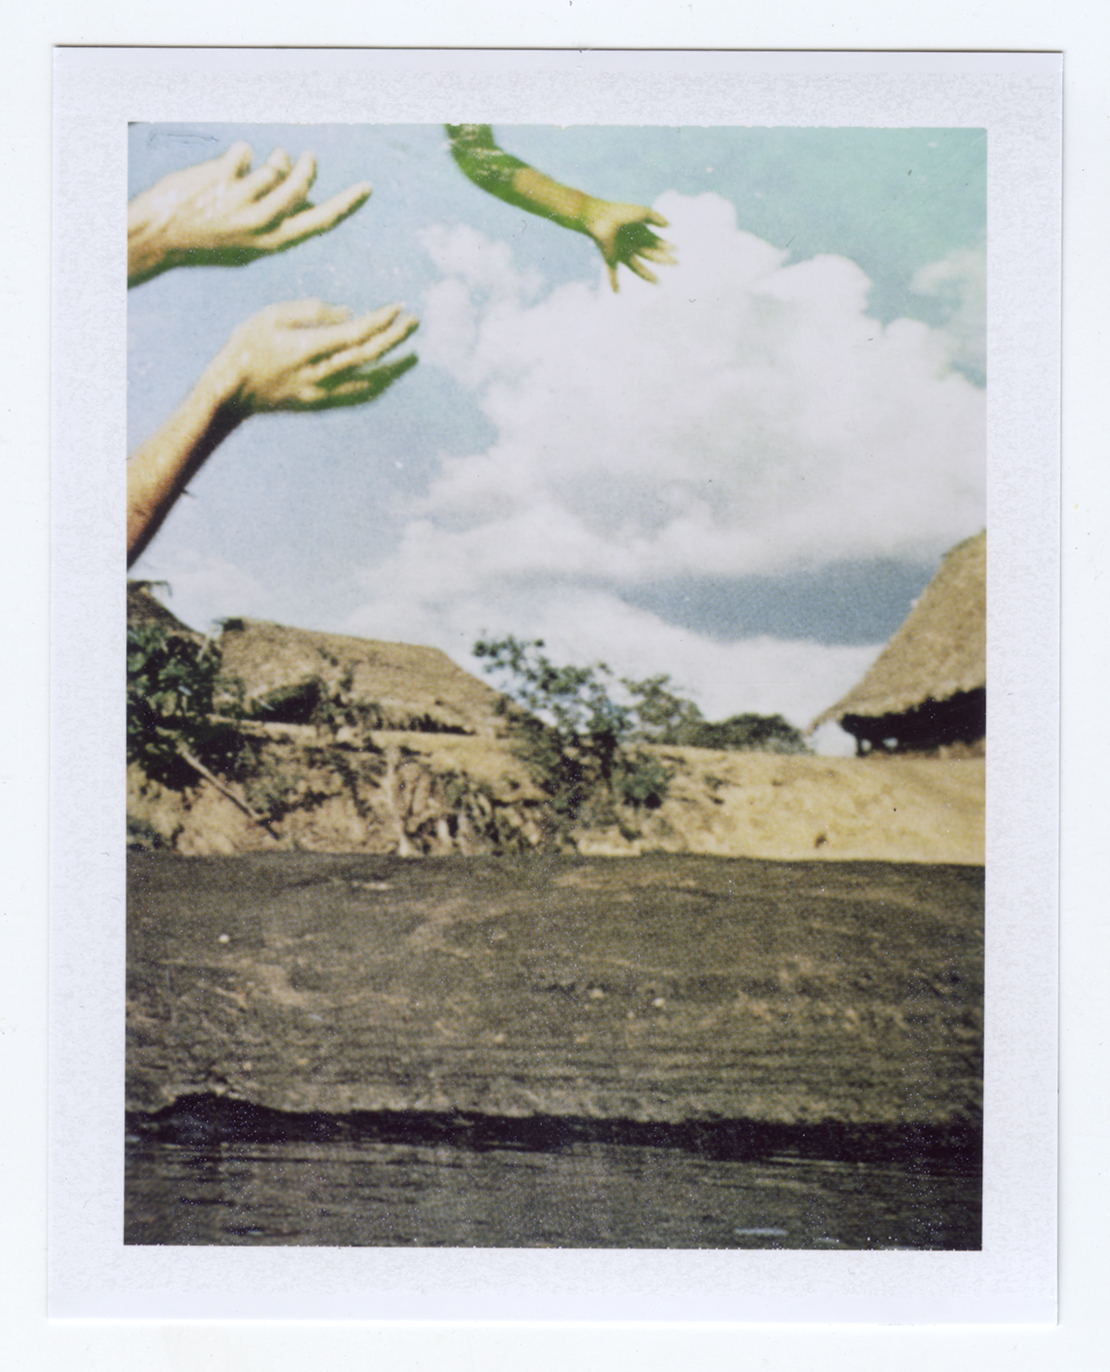   dreams of flight (being caught or crashing)  Polaroid of found National Geographic, 2015   Statement + Info  